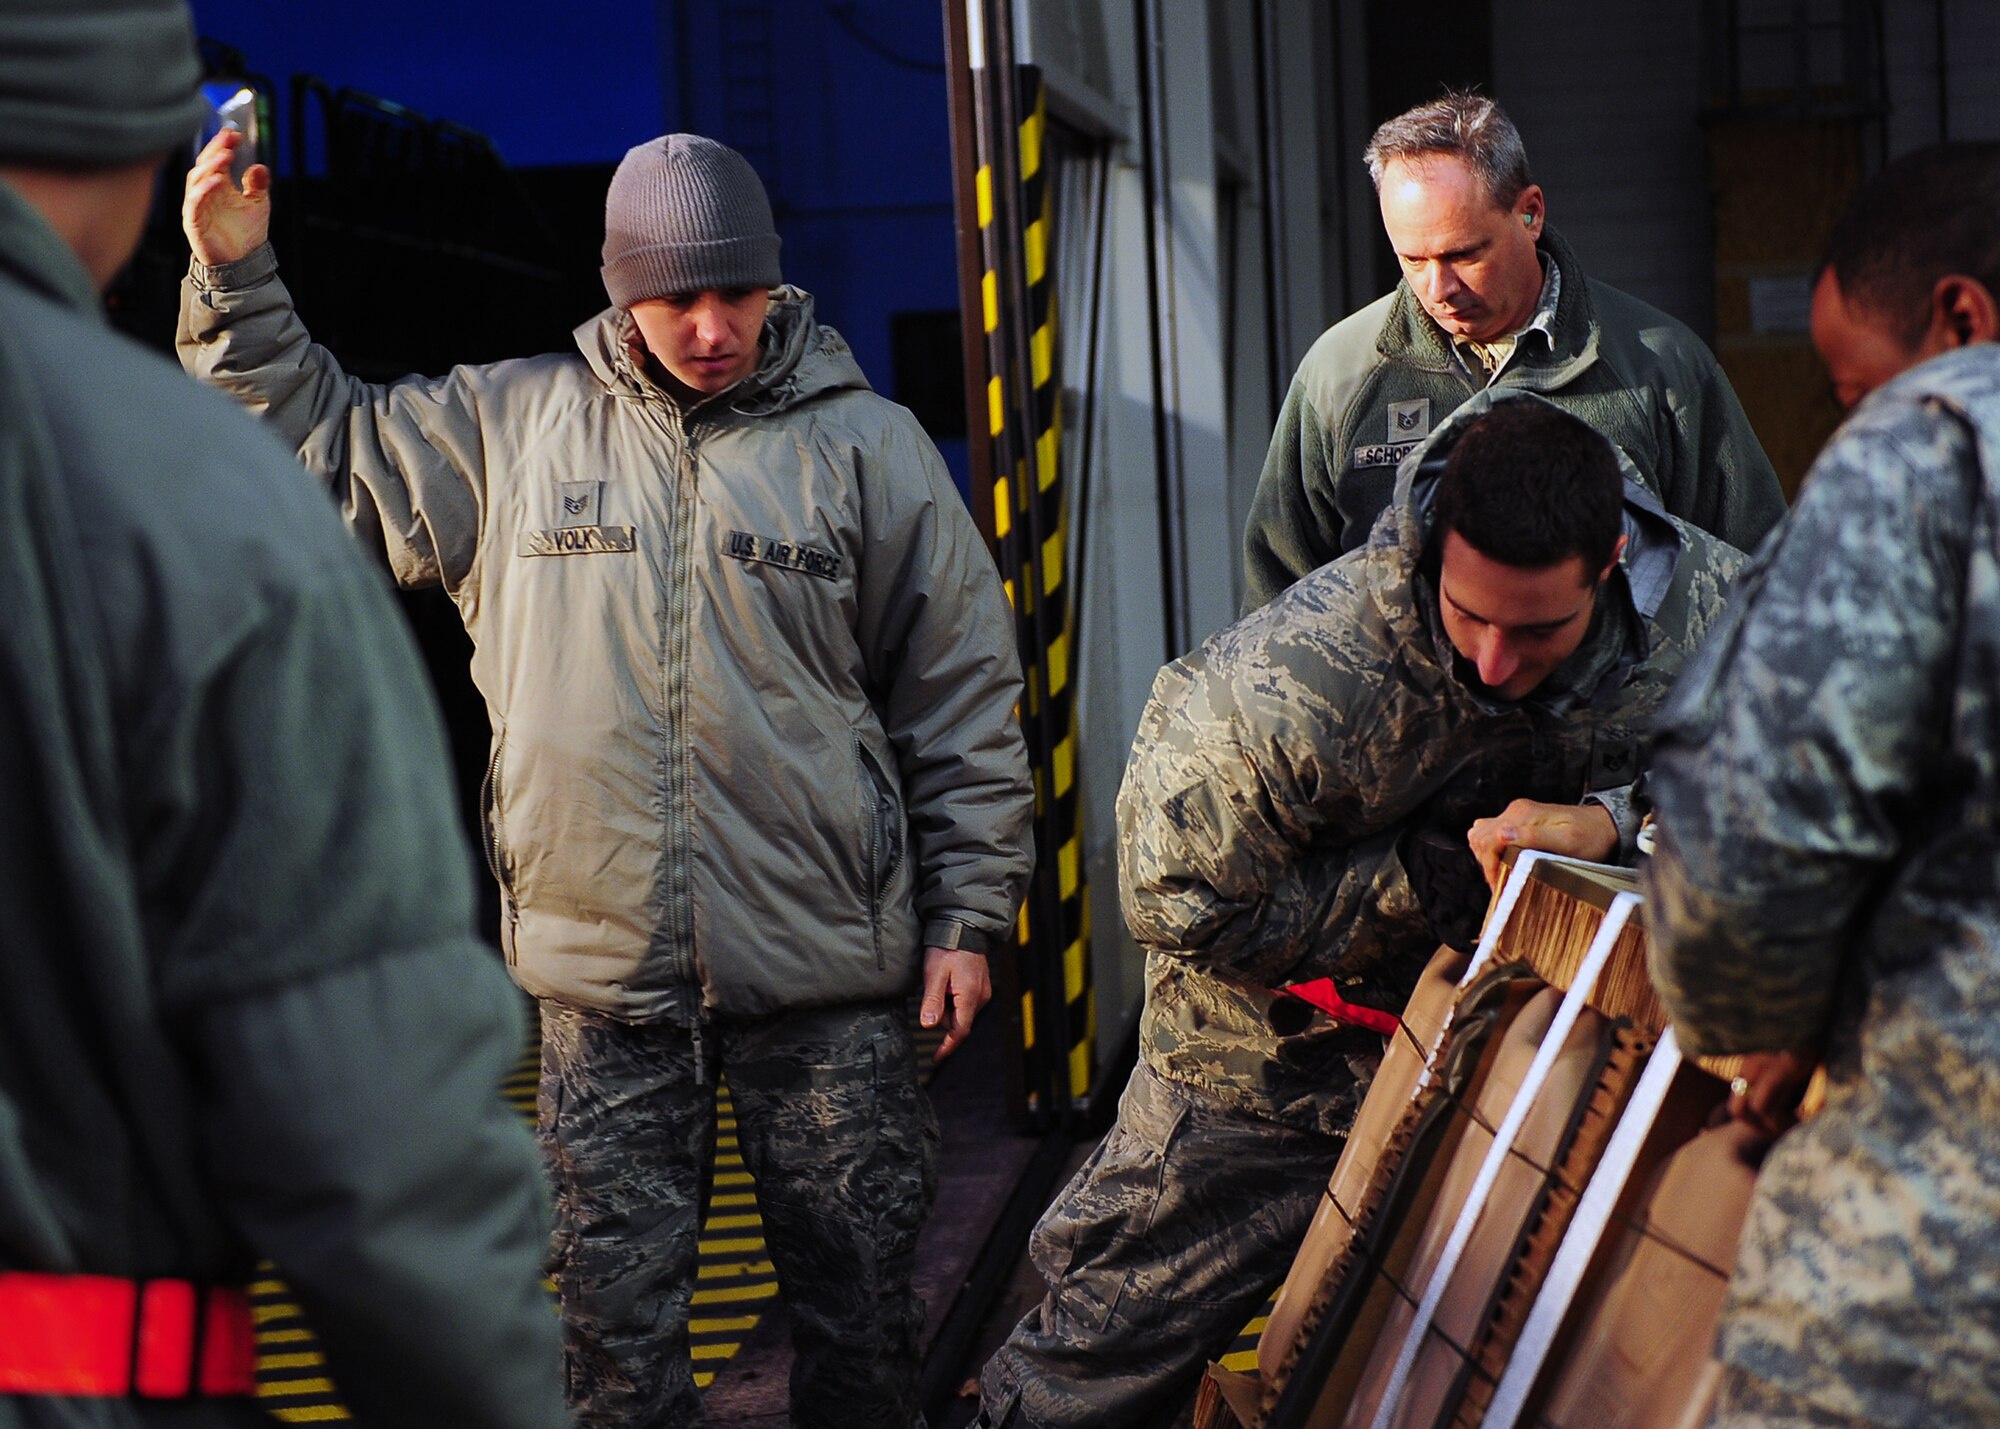 Staff Sgt. Matthew Volk guides fellow team members as they load a container specifically built for Santa Claus to deliver toys to children on Dec. 15, 2014, from Ramstein Air Base, Germany. Much like Santa’s elves, these Airmen and Soldiers were responsible for packing Santa’s sleigh, which happened to be a C-130J Super Hercules. Volk is a 86th Logistics Readiness Squadron aerial delivery technician. (U.S. Air Force photo/Staff Sgt. Kris Levasseur)